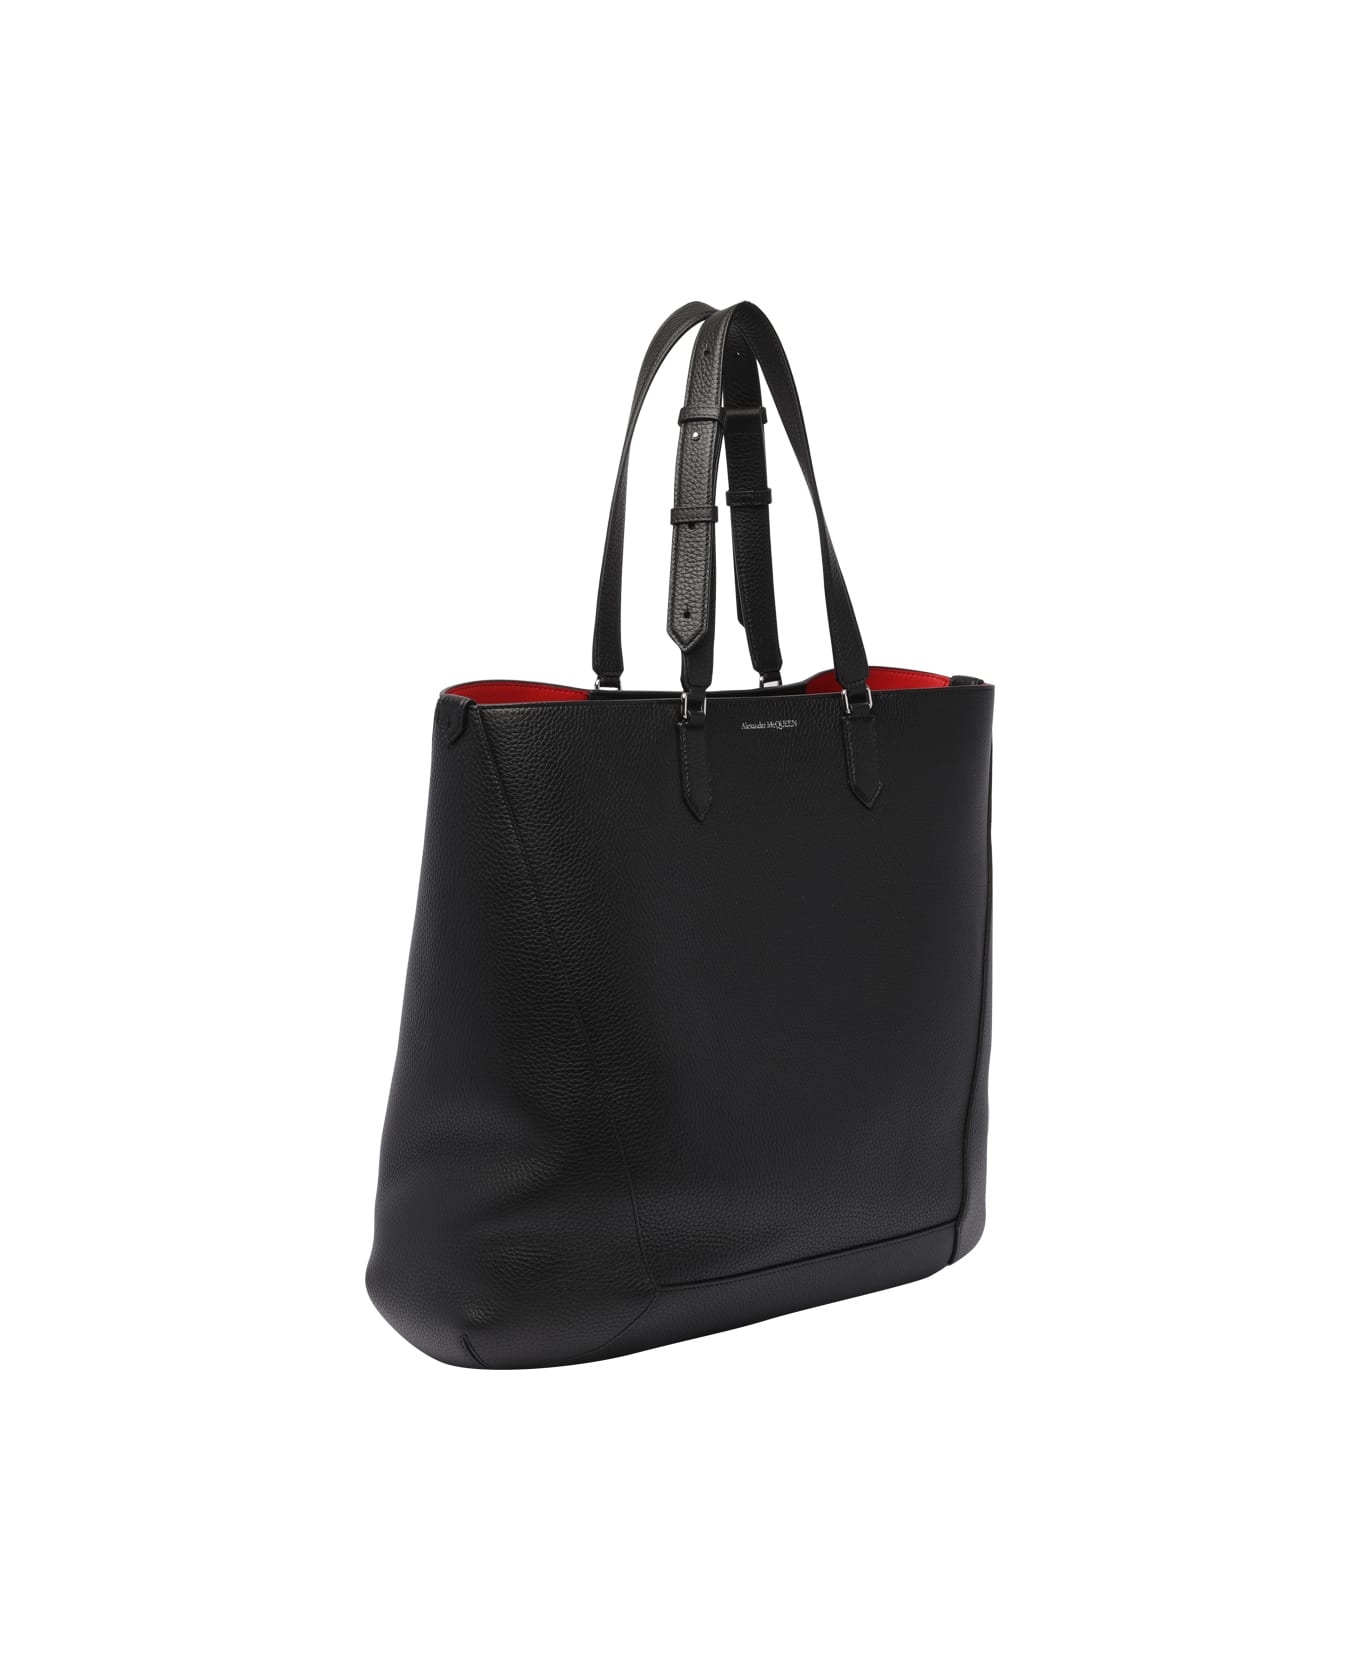 Alexander McQueen Tote Bag Large The Edge - Black トートバッグ